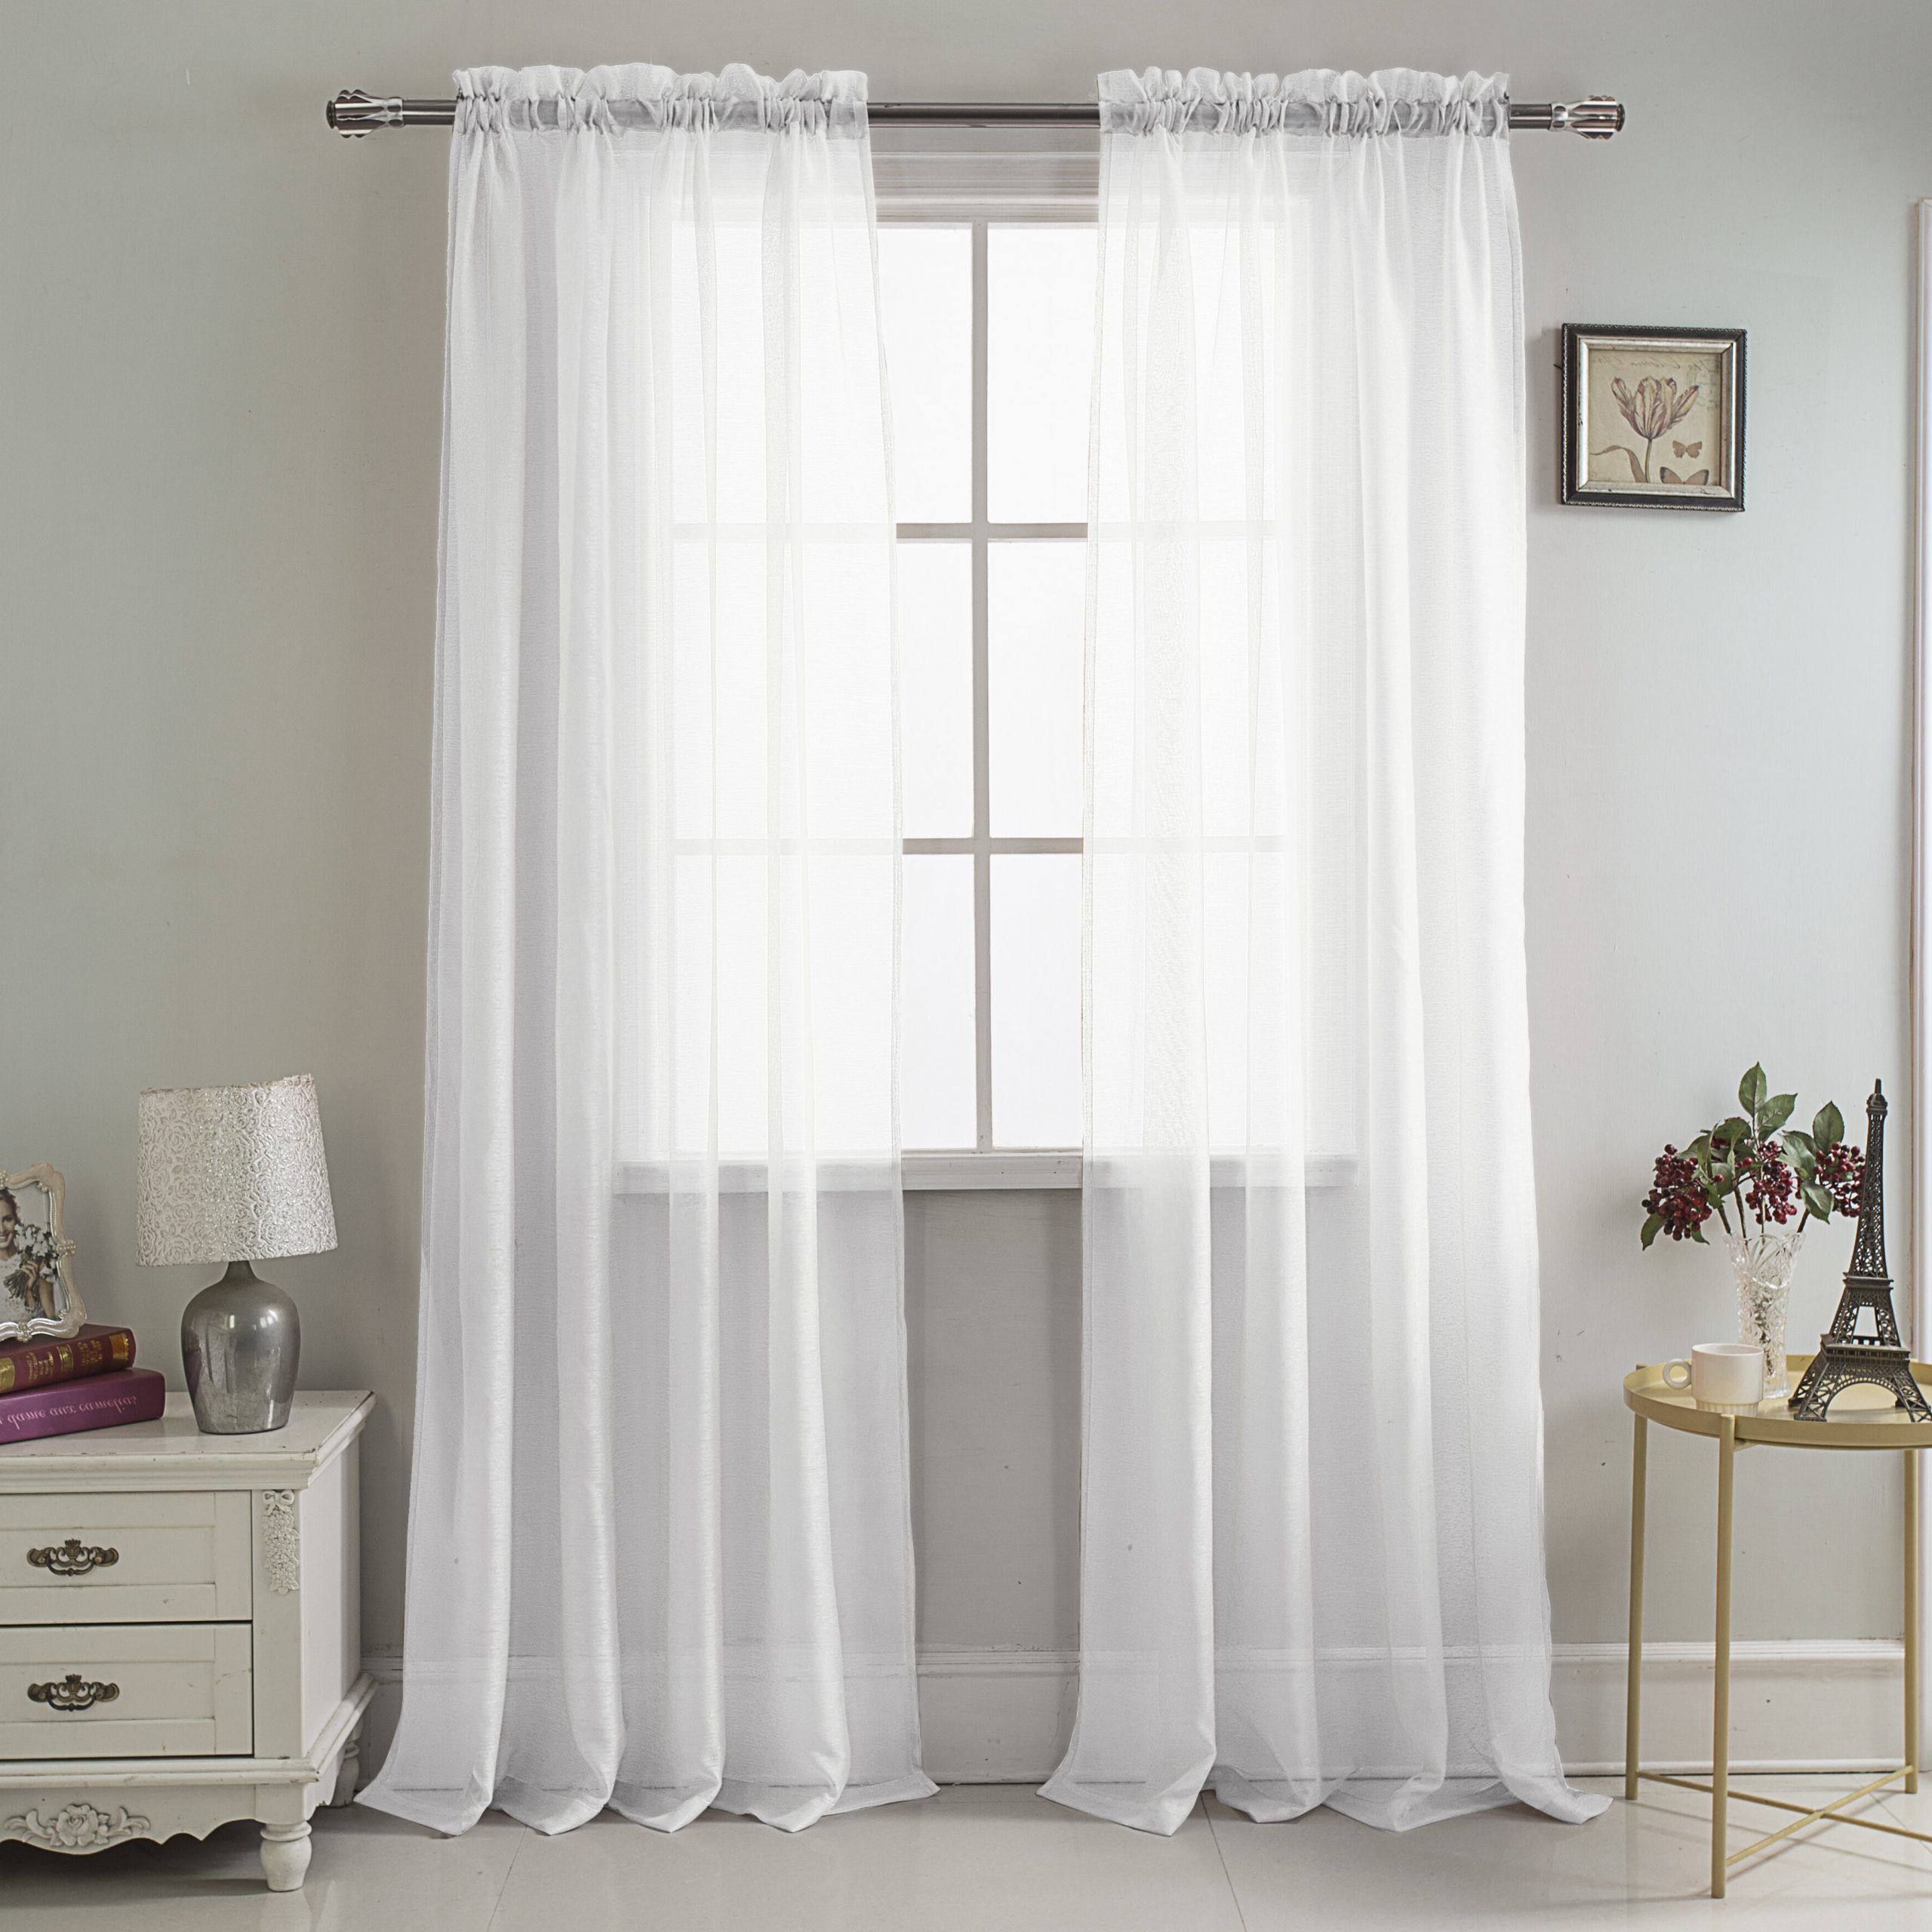 Current Arm And Hammer Curtains Fresh Odor Neutralizing Single Curtain Panels Pertaining To Harriet Bee Daron Solid Sheer Rod Pocket Curtains & Reviews (View 15 of 20)